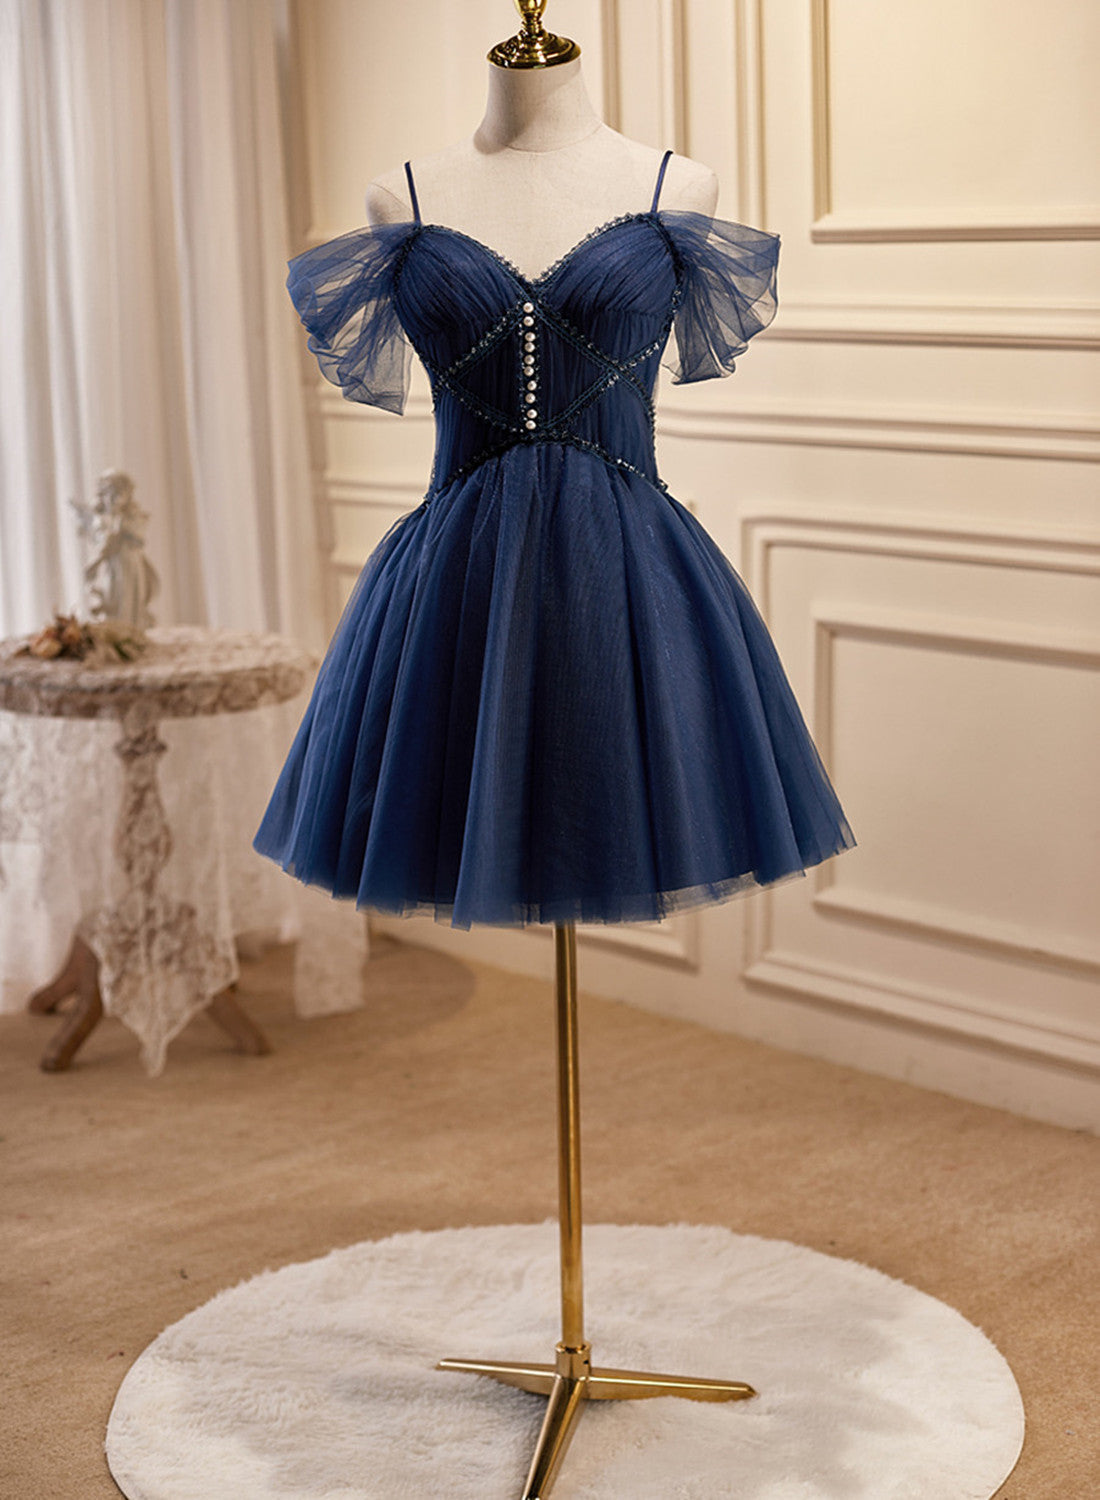 Navy Blue Tulle Beaded Short Prom Dress Outfits For Girls, Blue Tulle Off Shoulder Homecoming Dress